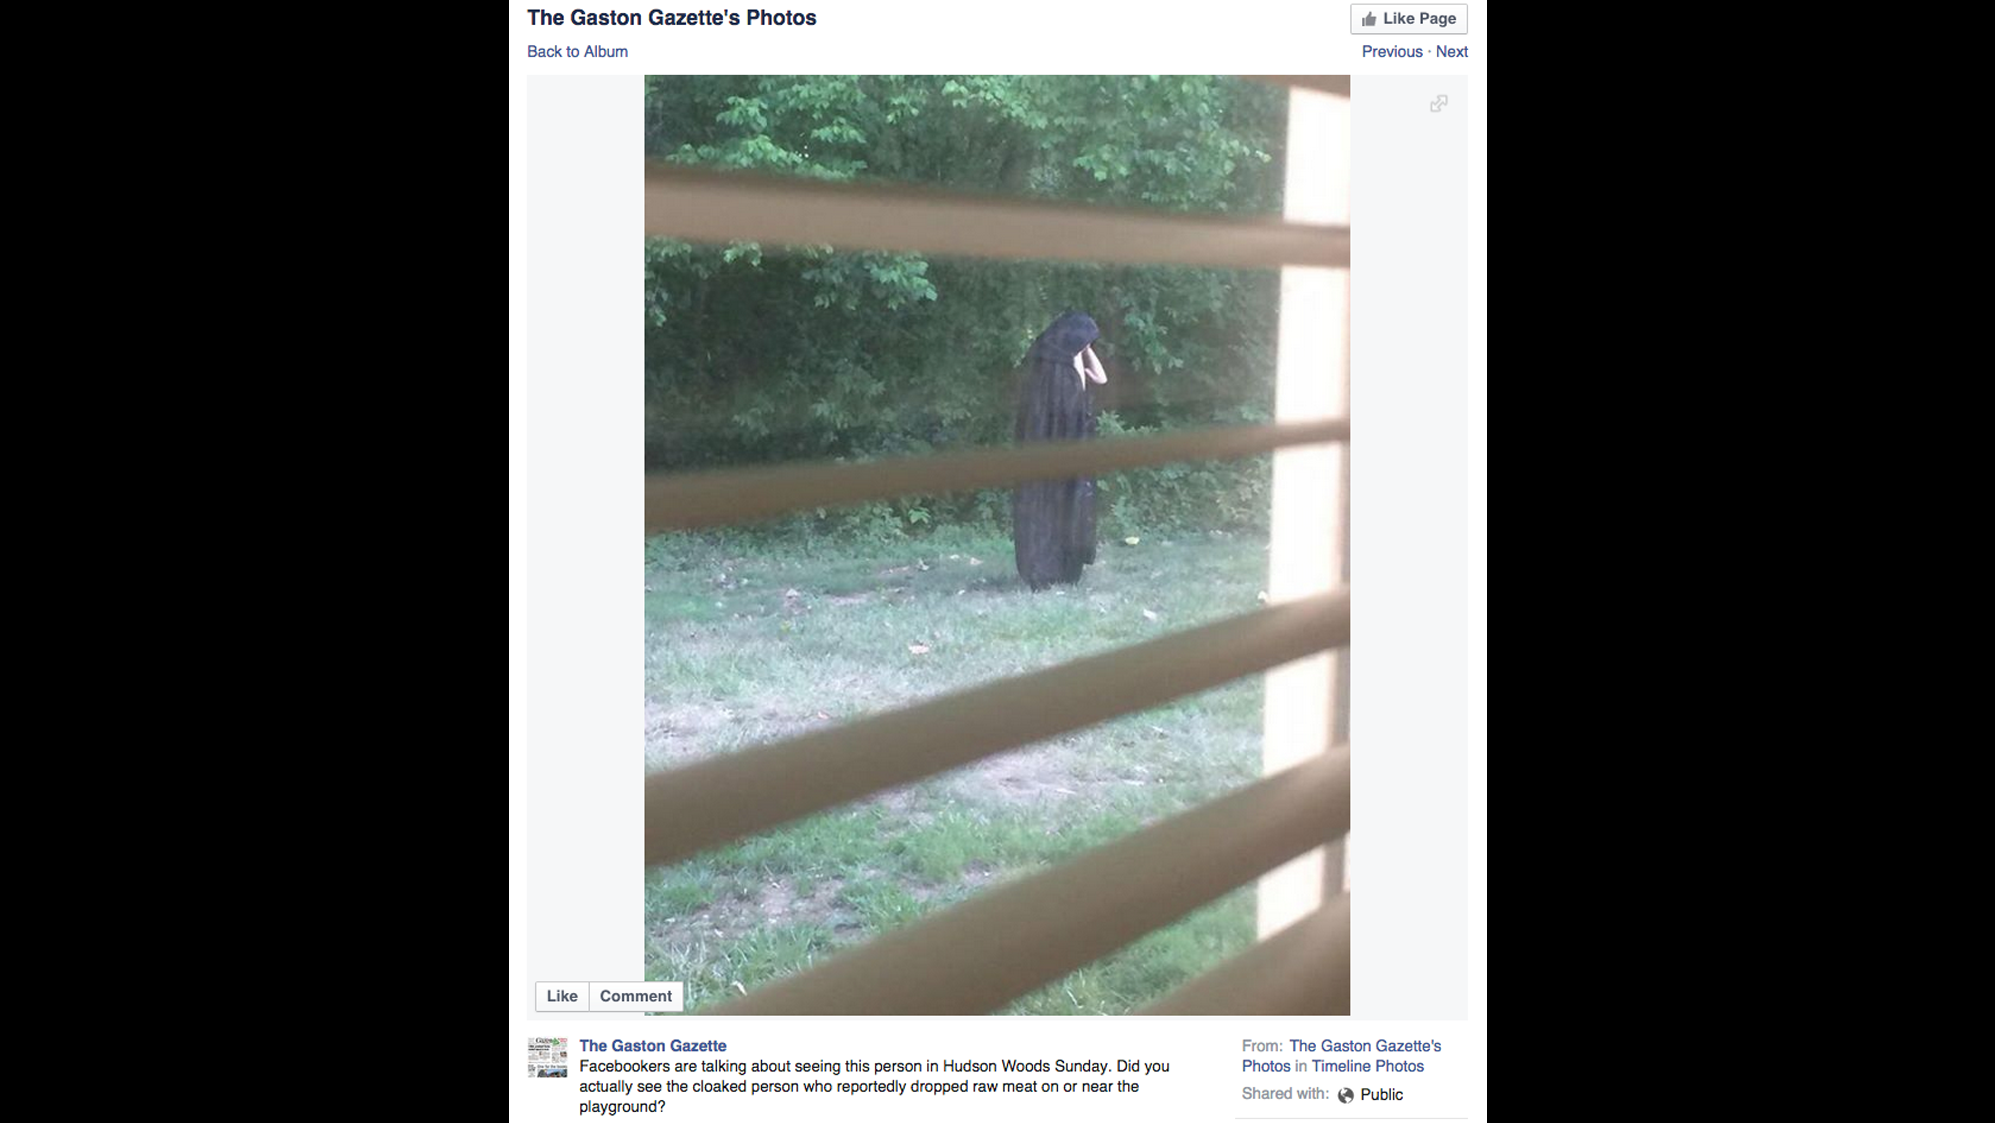 Police say this creepy figure could be just a prank.